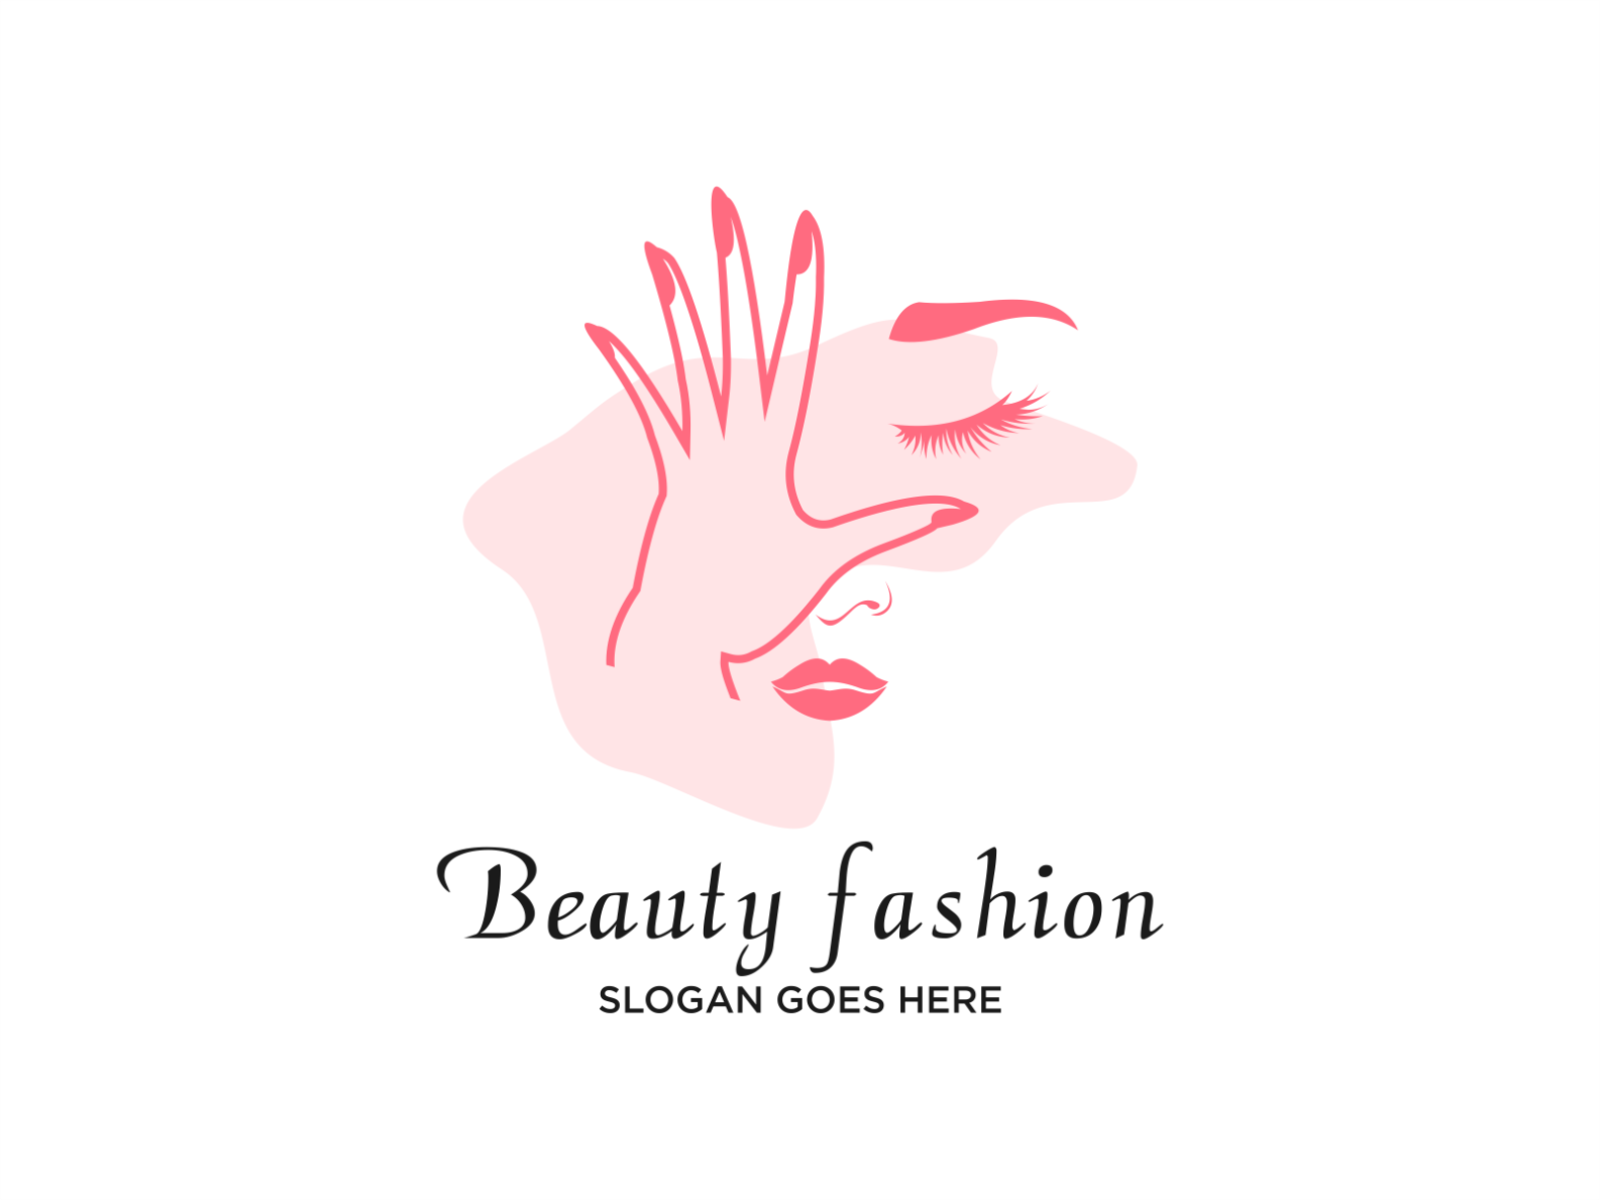 Fenty Beauty Logo Vector - (.Ai .PNG .SVG .EPS Free Download)